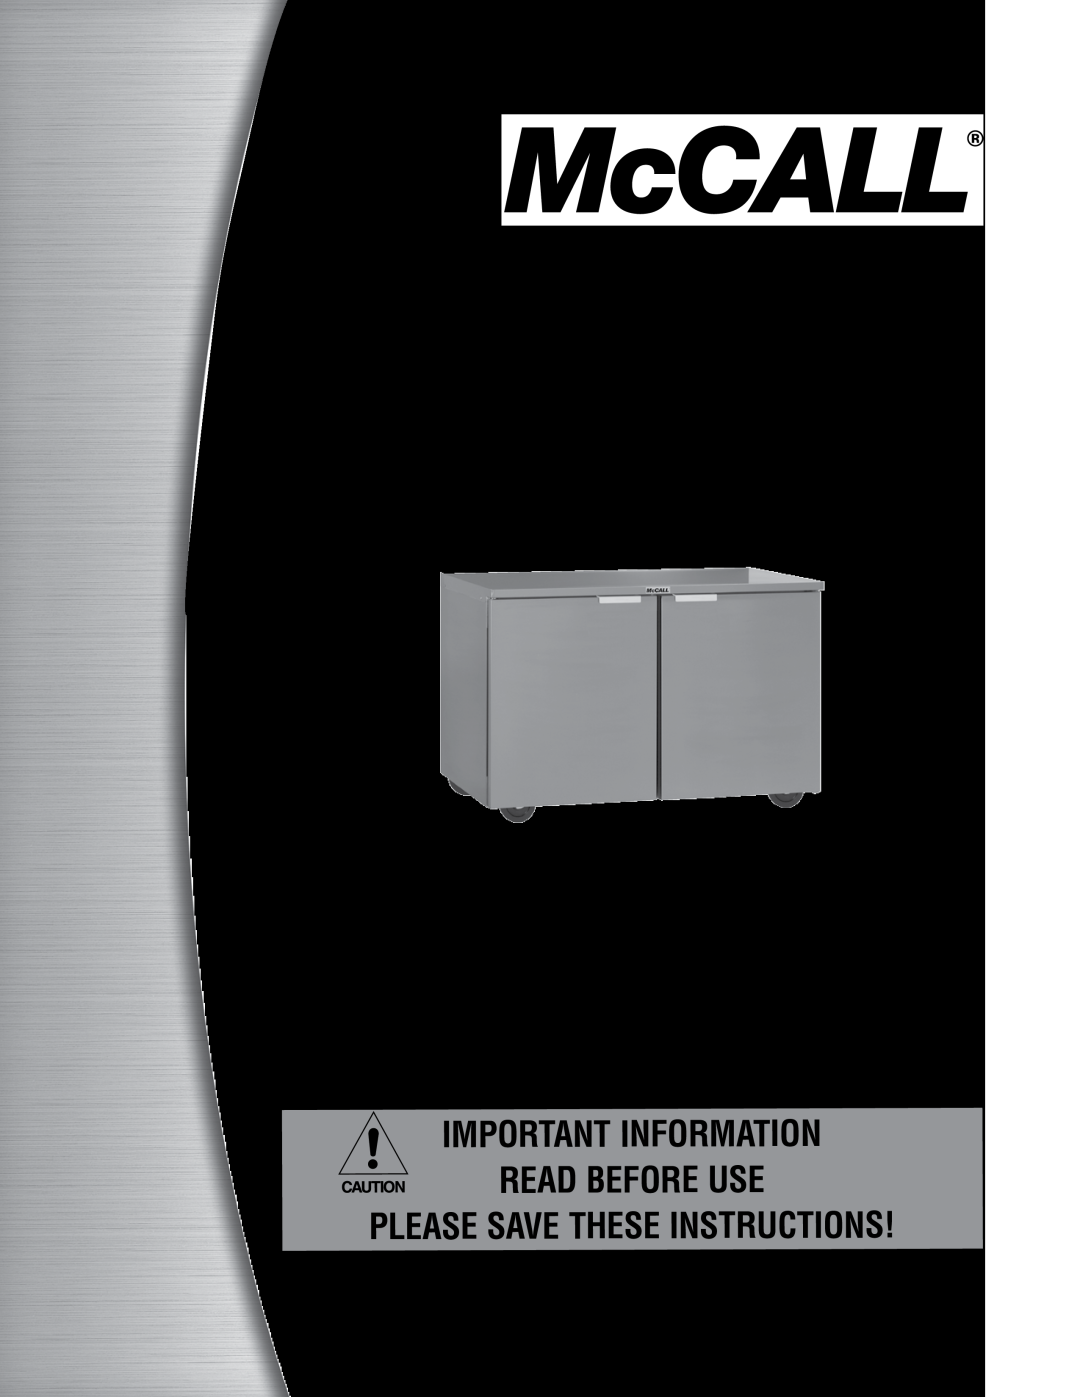 McCall Refrigeration MCCSTR27, MCCR48 manual June, Compact Refrigerators & Freezers, Service, Installation and Care Manual 